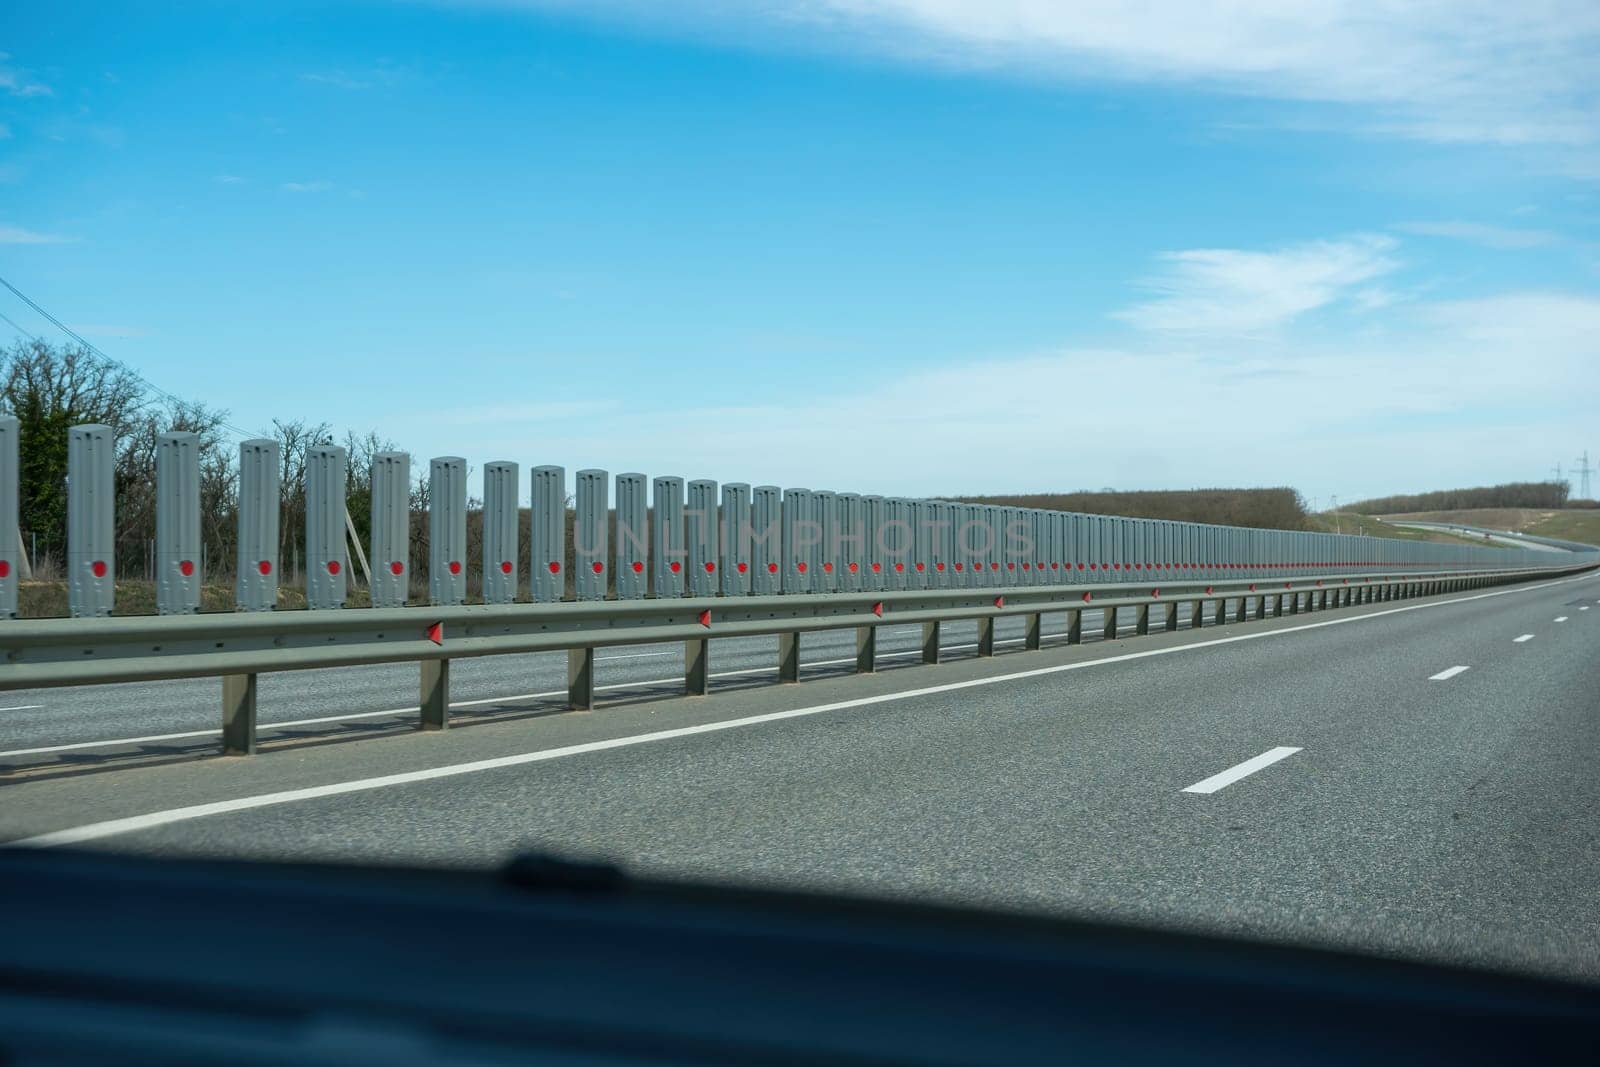 A road with a long line of metal posts with red hearts on them. The road is empty and the sky is clear